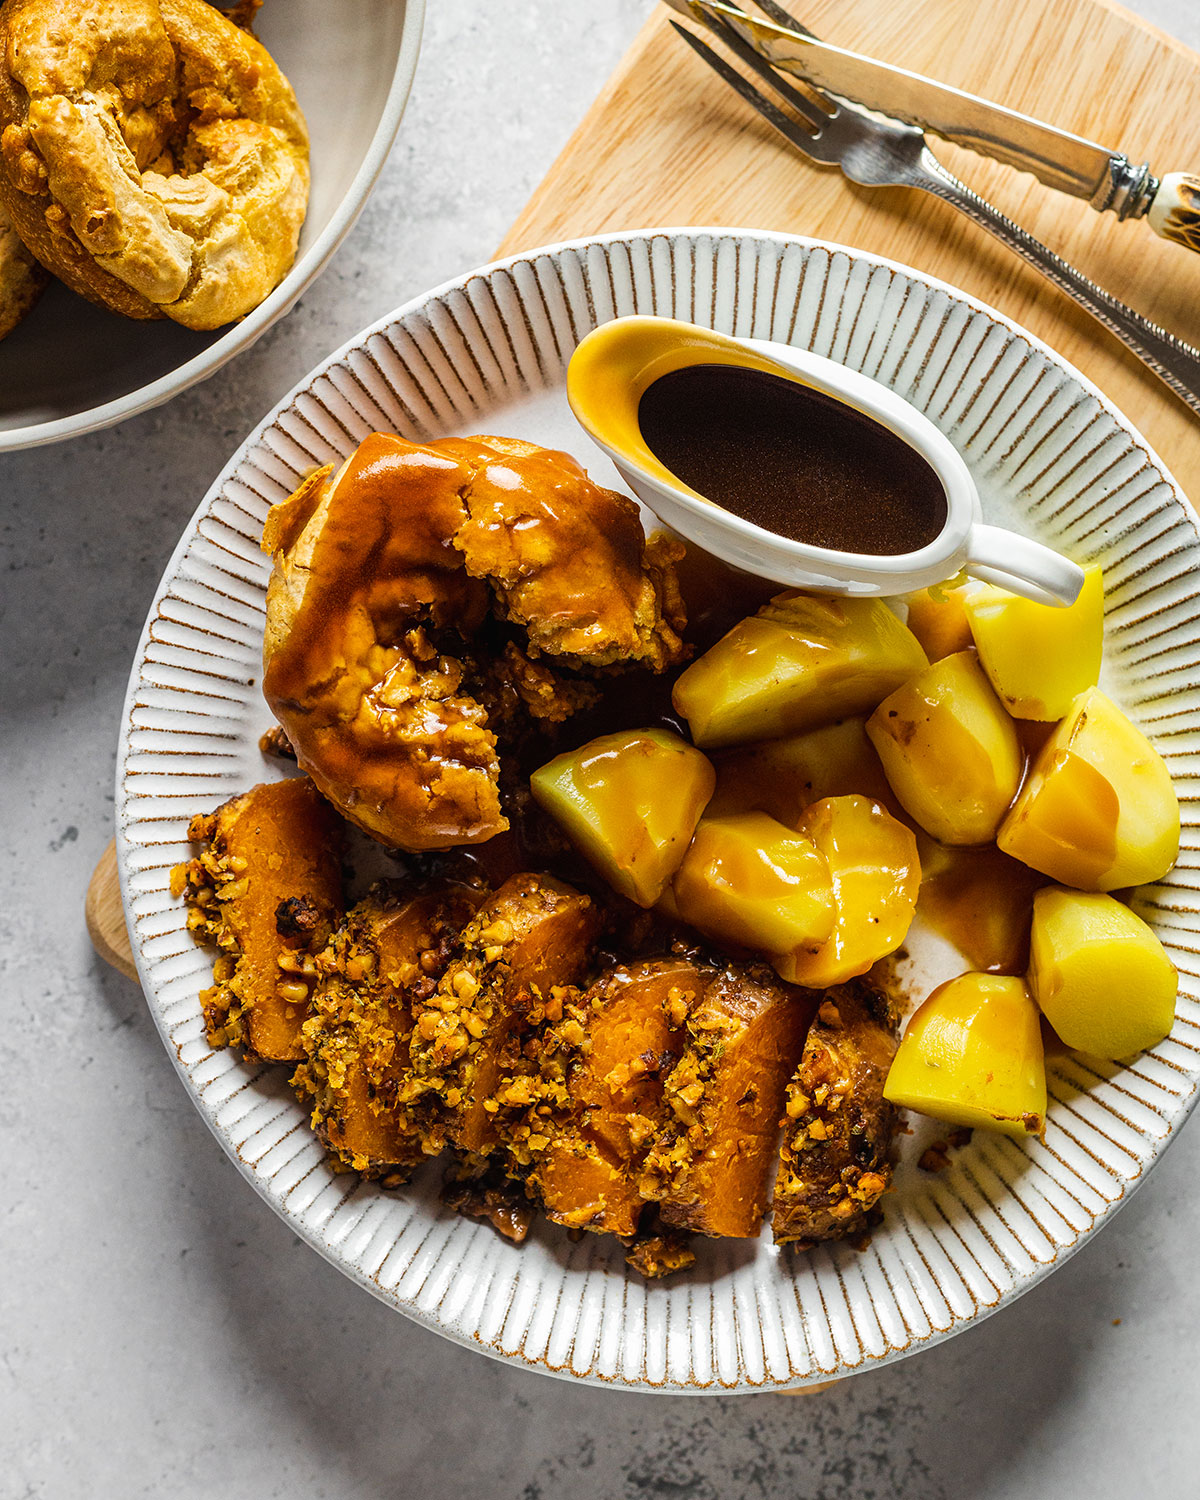 A delicious vegan roast dinner on a white plate including the vegan Yorkshire pudding covered in vegan gravy